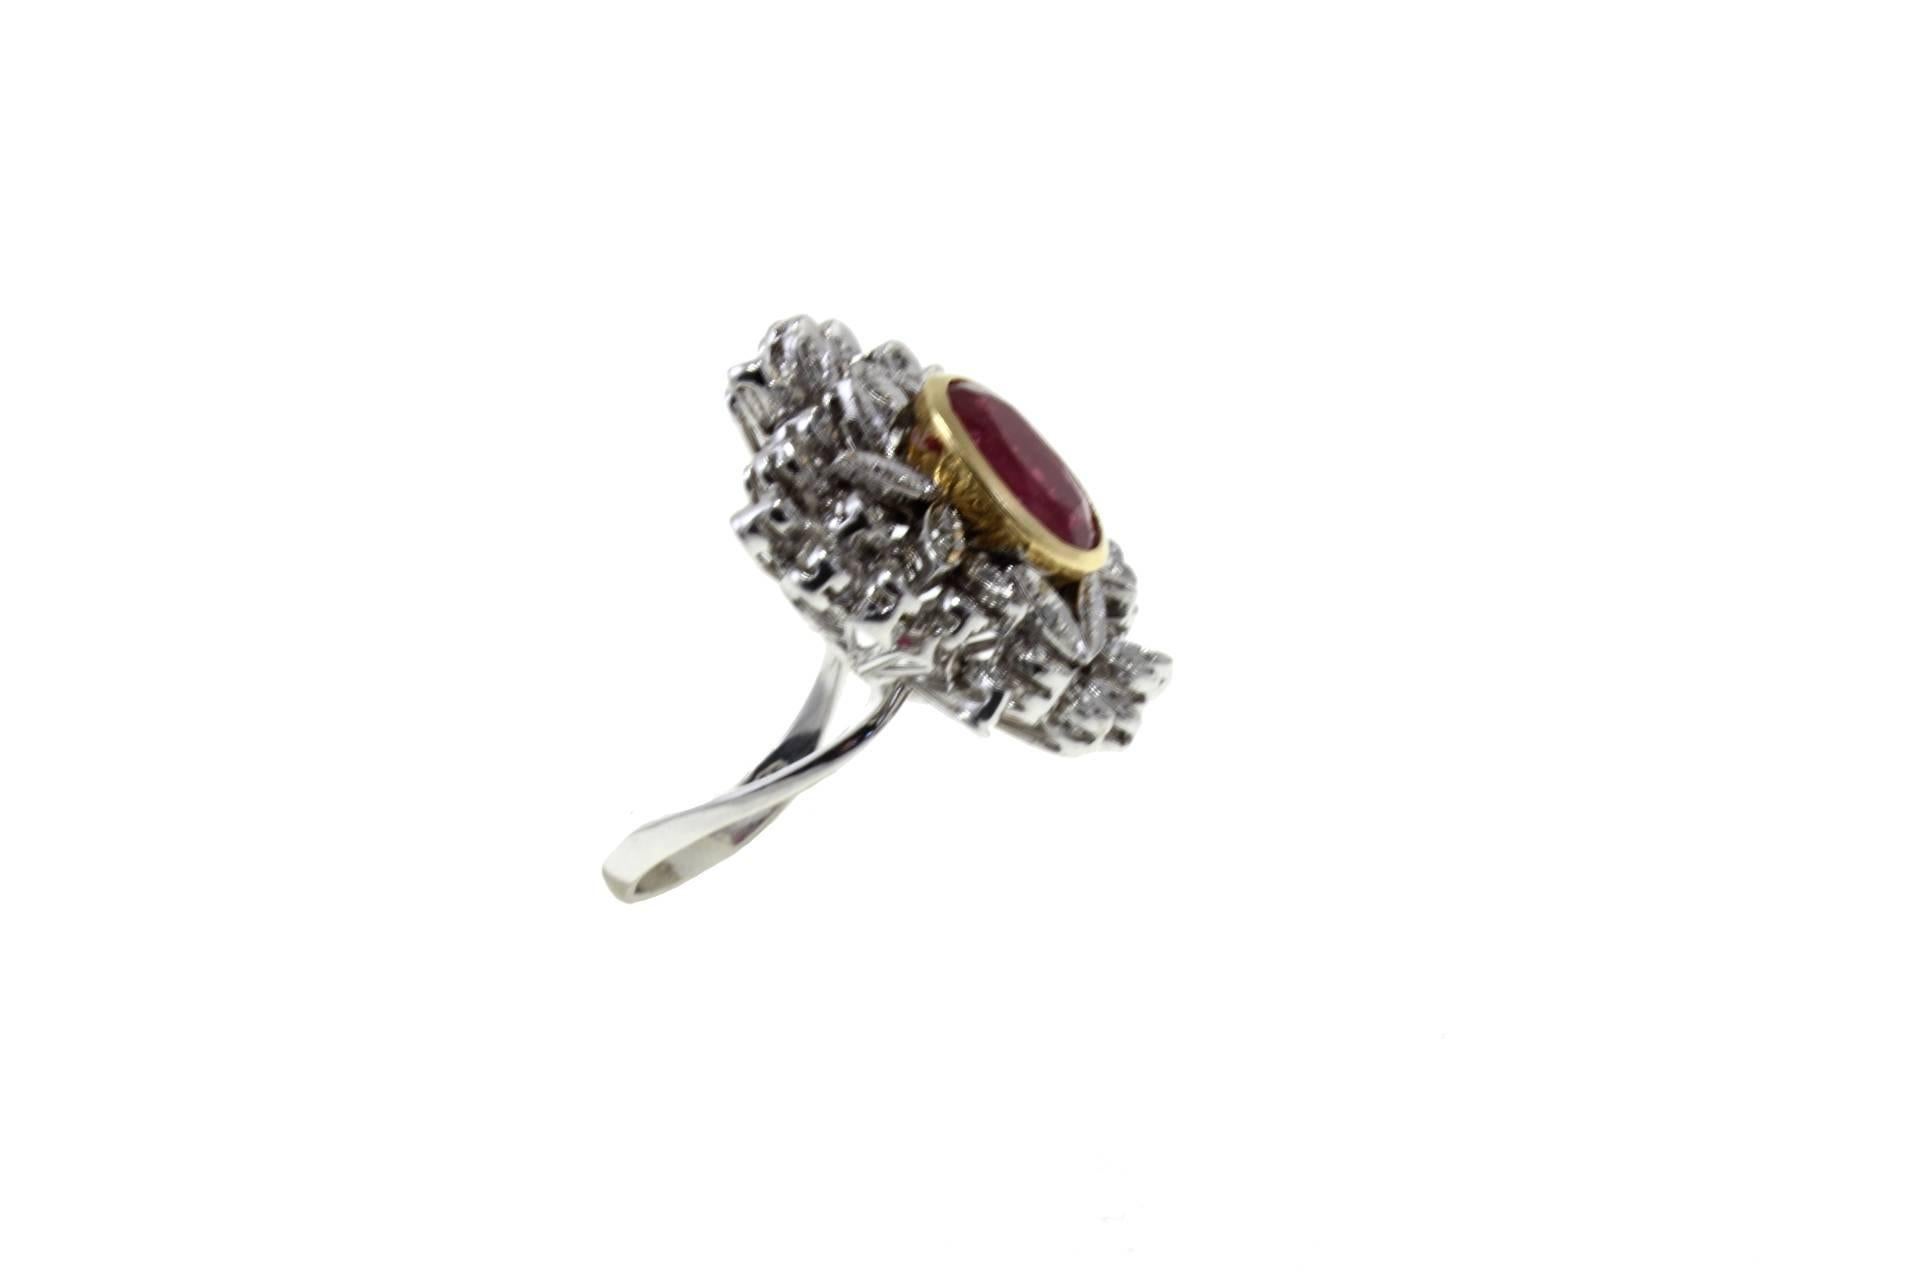 Shining ring in 14K white and rose gold composed of 6.12 ct of central ruby surrounded by 0.43 ct of diamonds encrusted leaves.
Diamonds 0.43kt
Ruby 6.12kt
Total Weight 13.60 g
R.F + gruu
